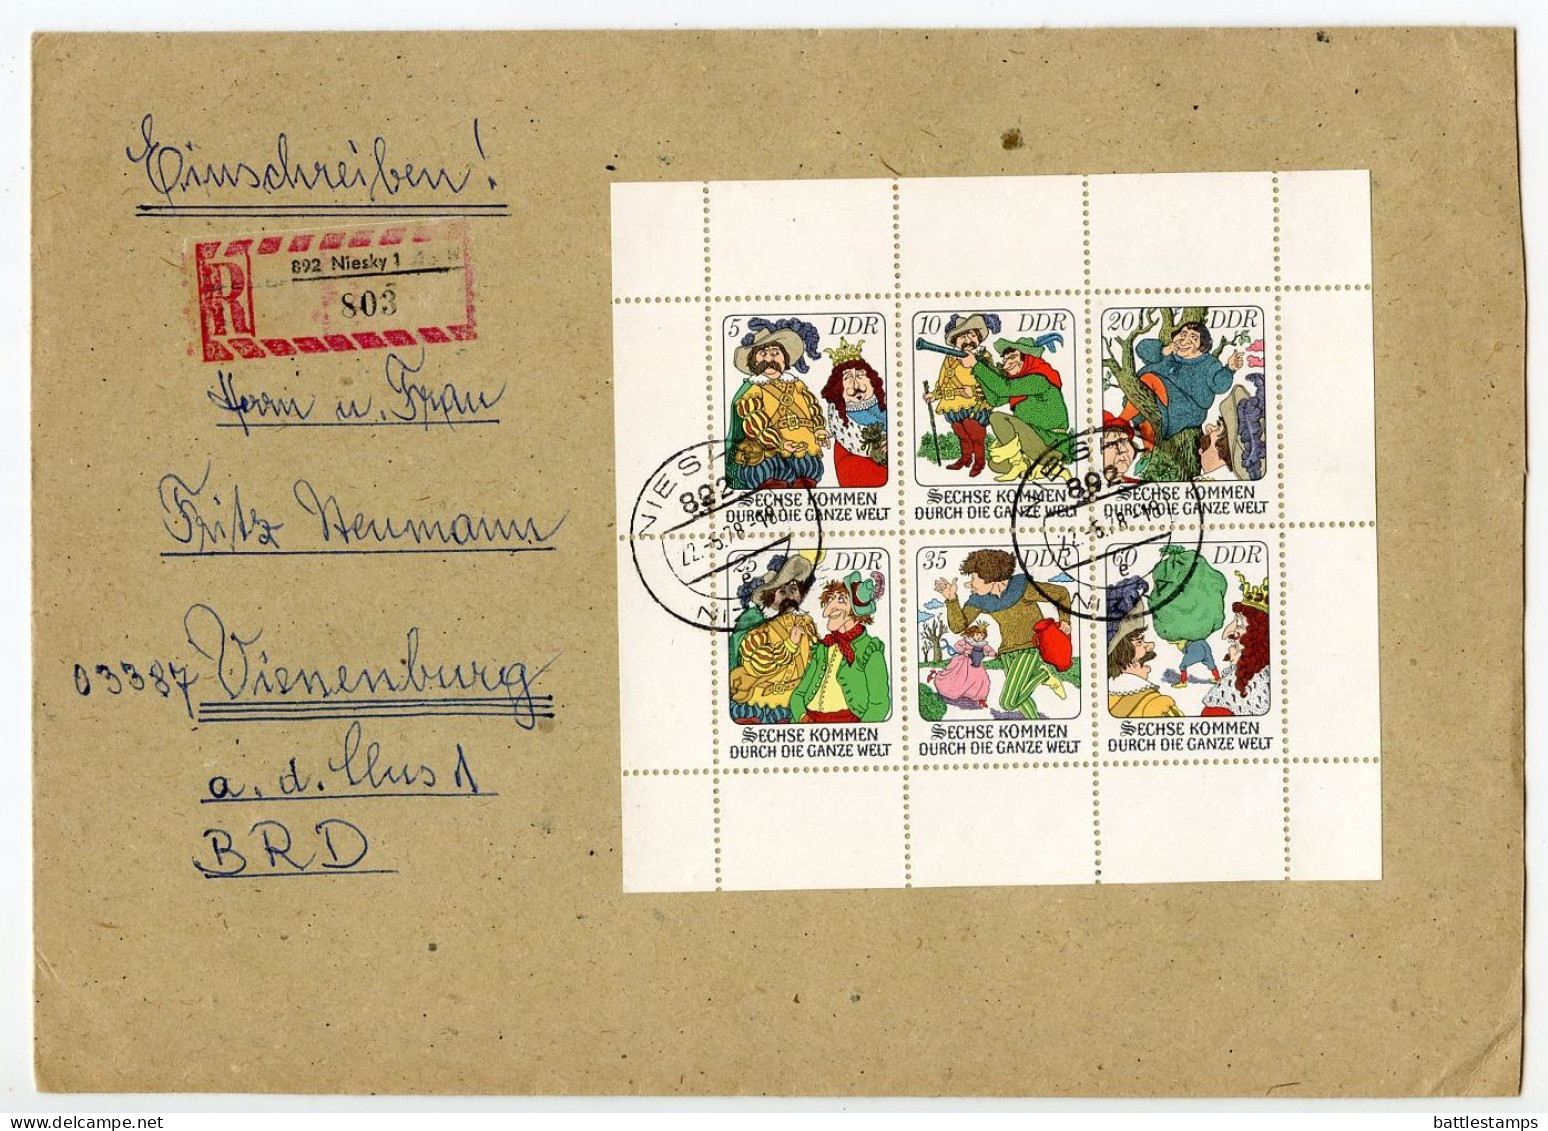 Germany, East 1978 Registered Cover; Niesky To Vienenburg; Stamps - Six Men Around The World Fairy Tale, Block Of 6 - Briefe U. Dokumente